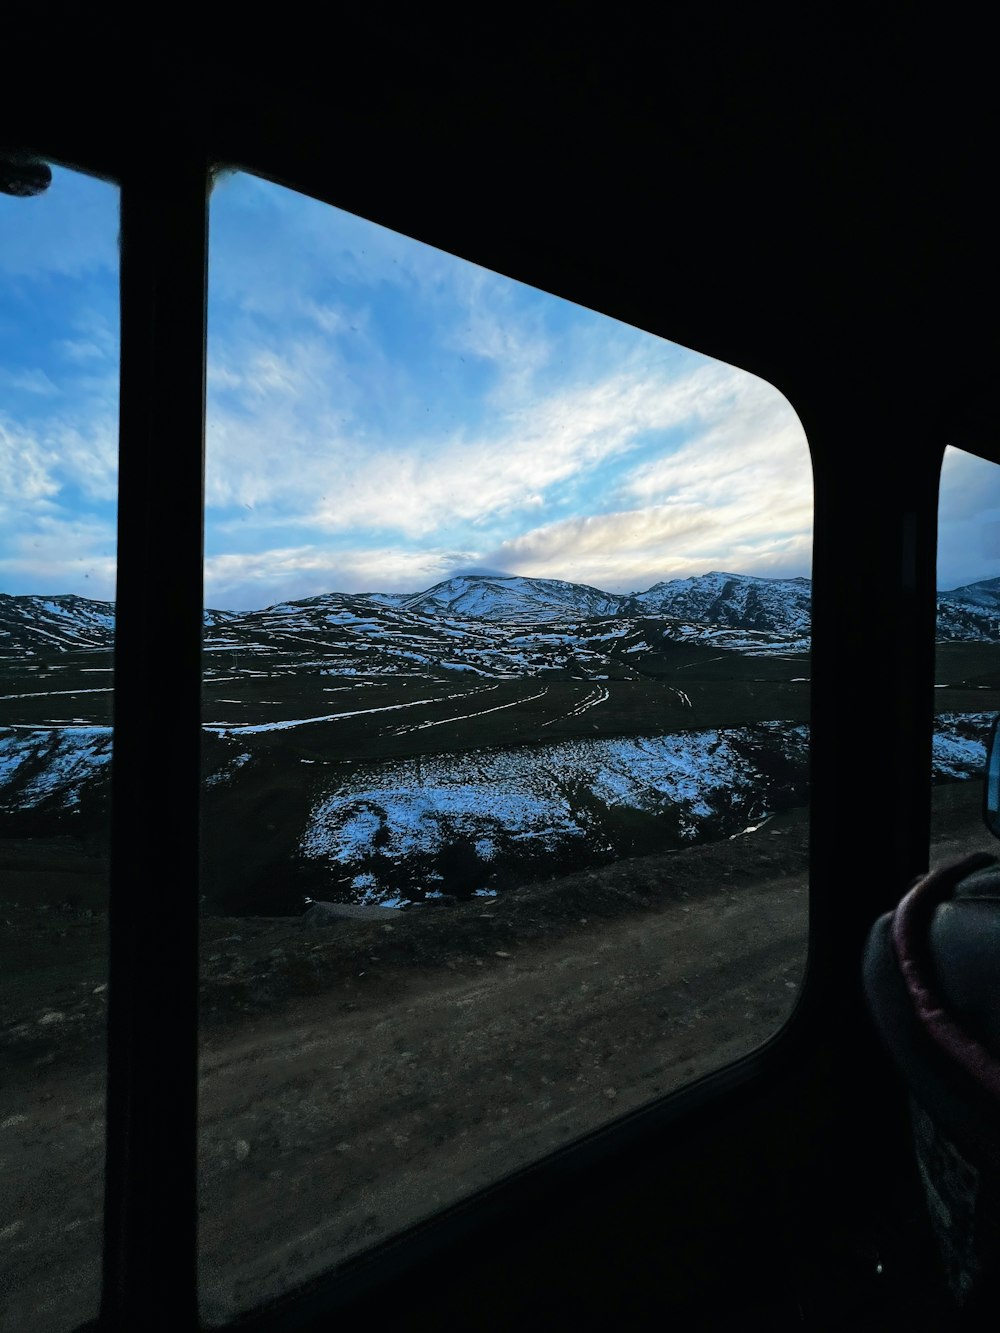 a view from inside a vehicle looking out the window